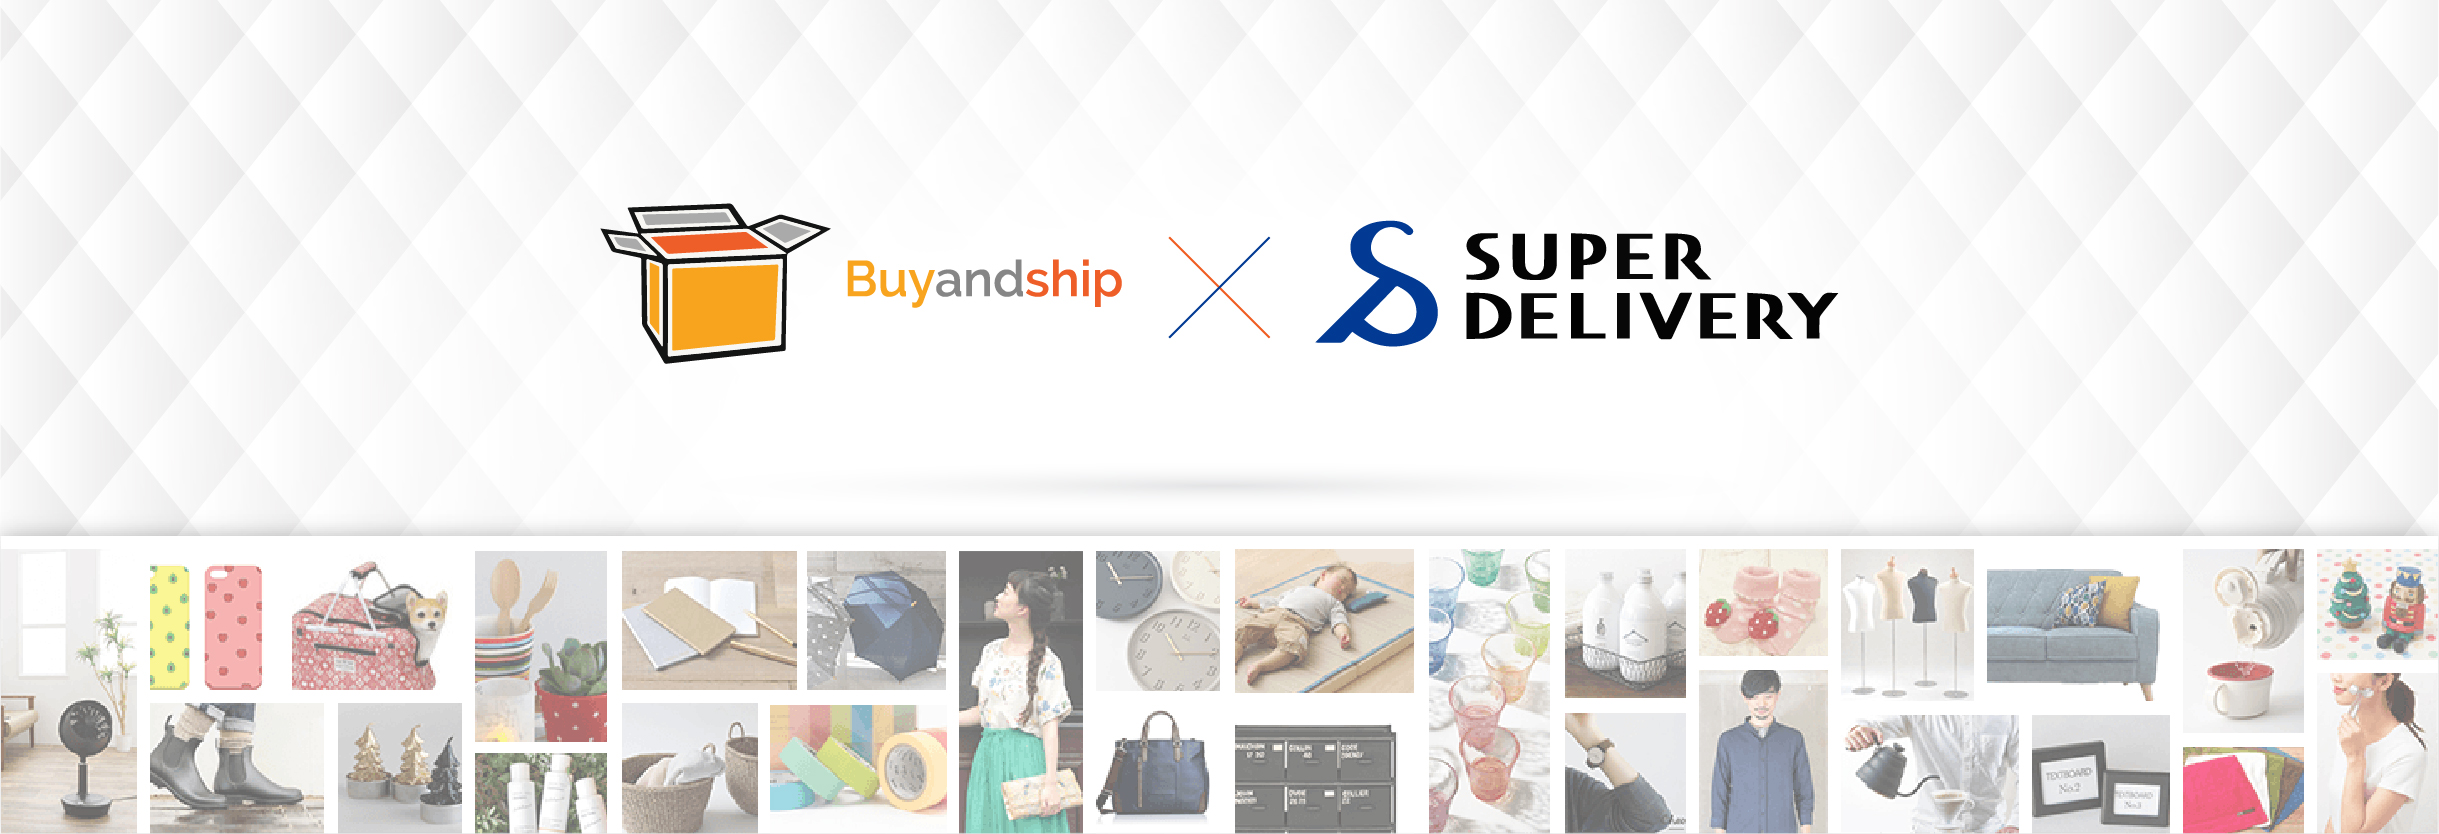 Buyandship X Delivery